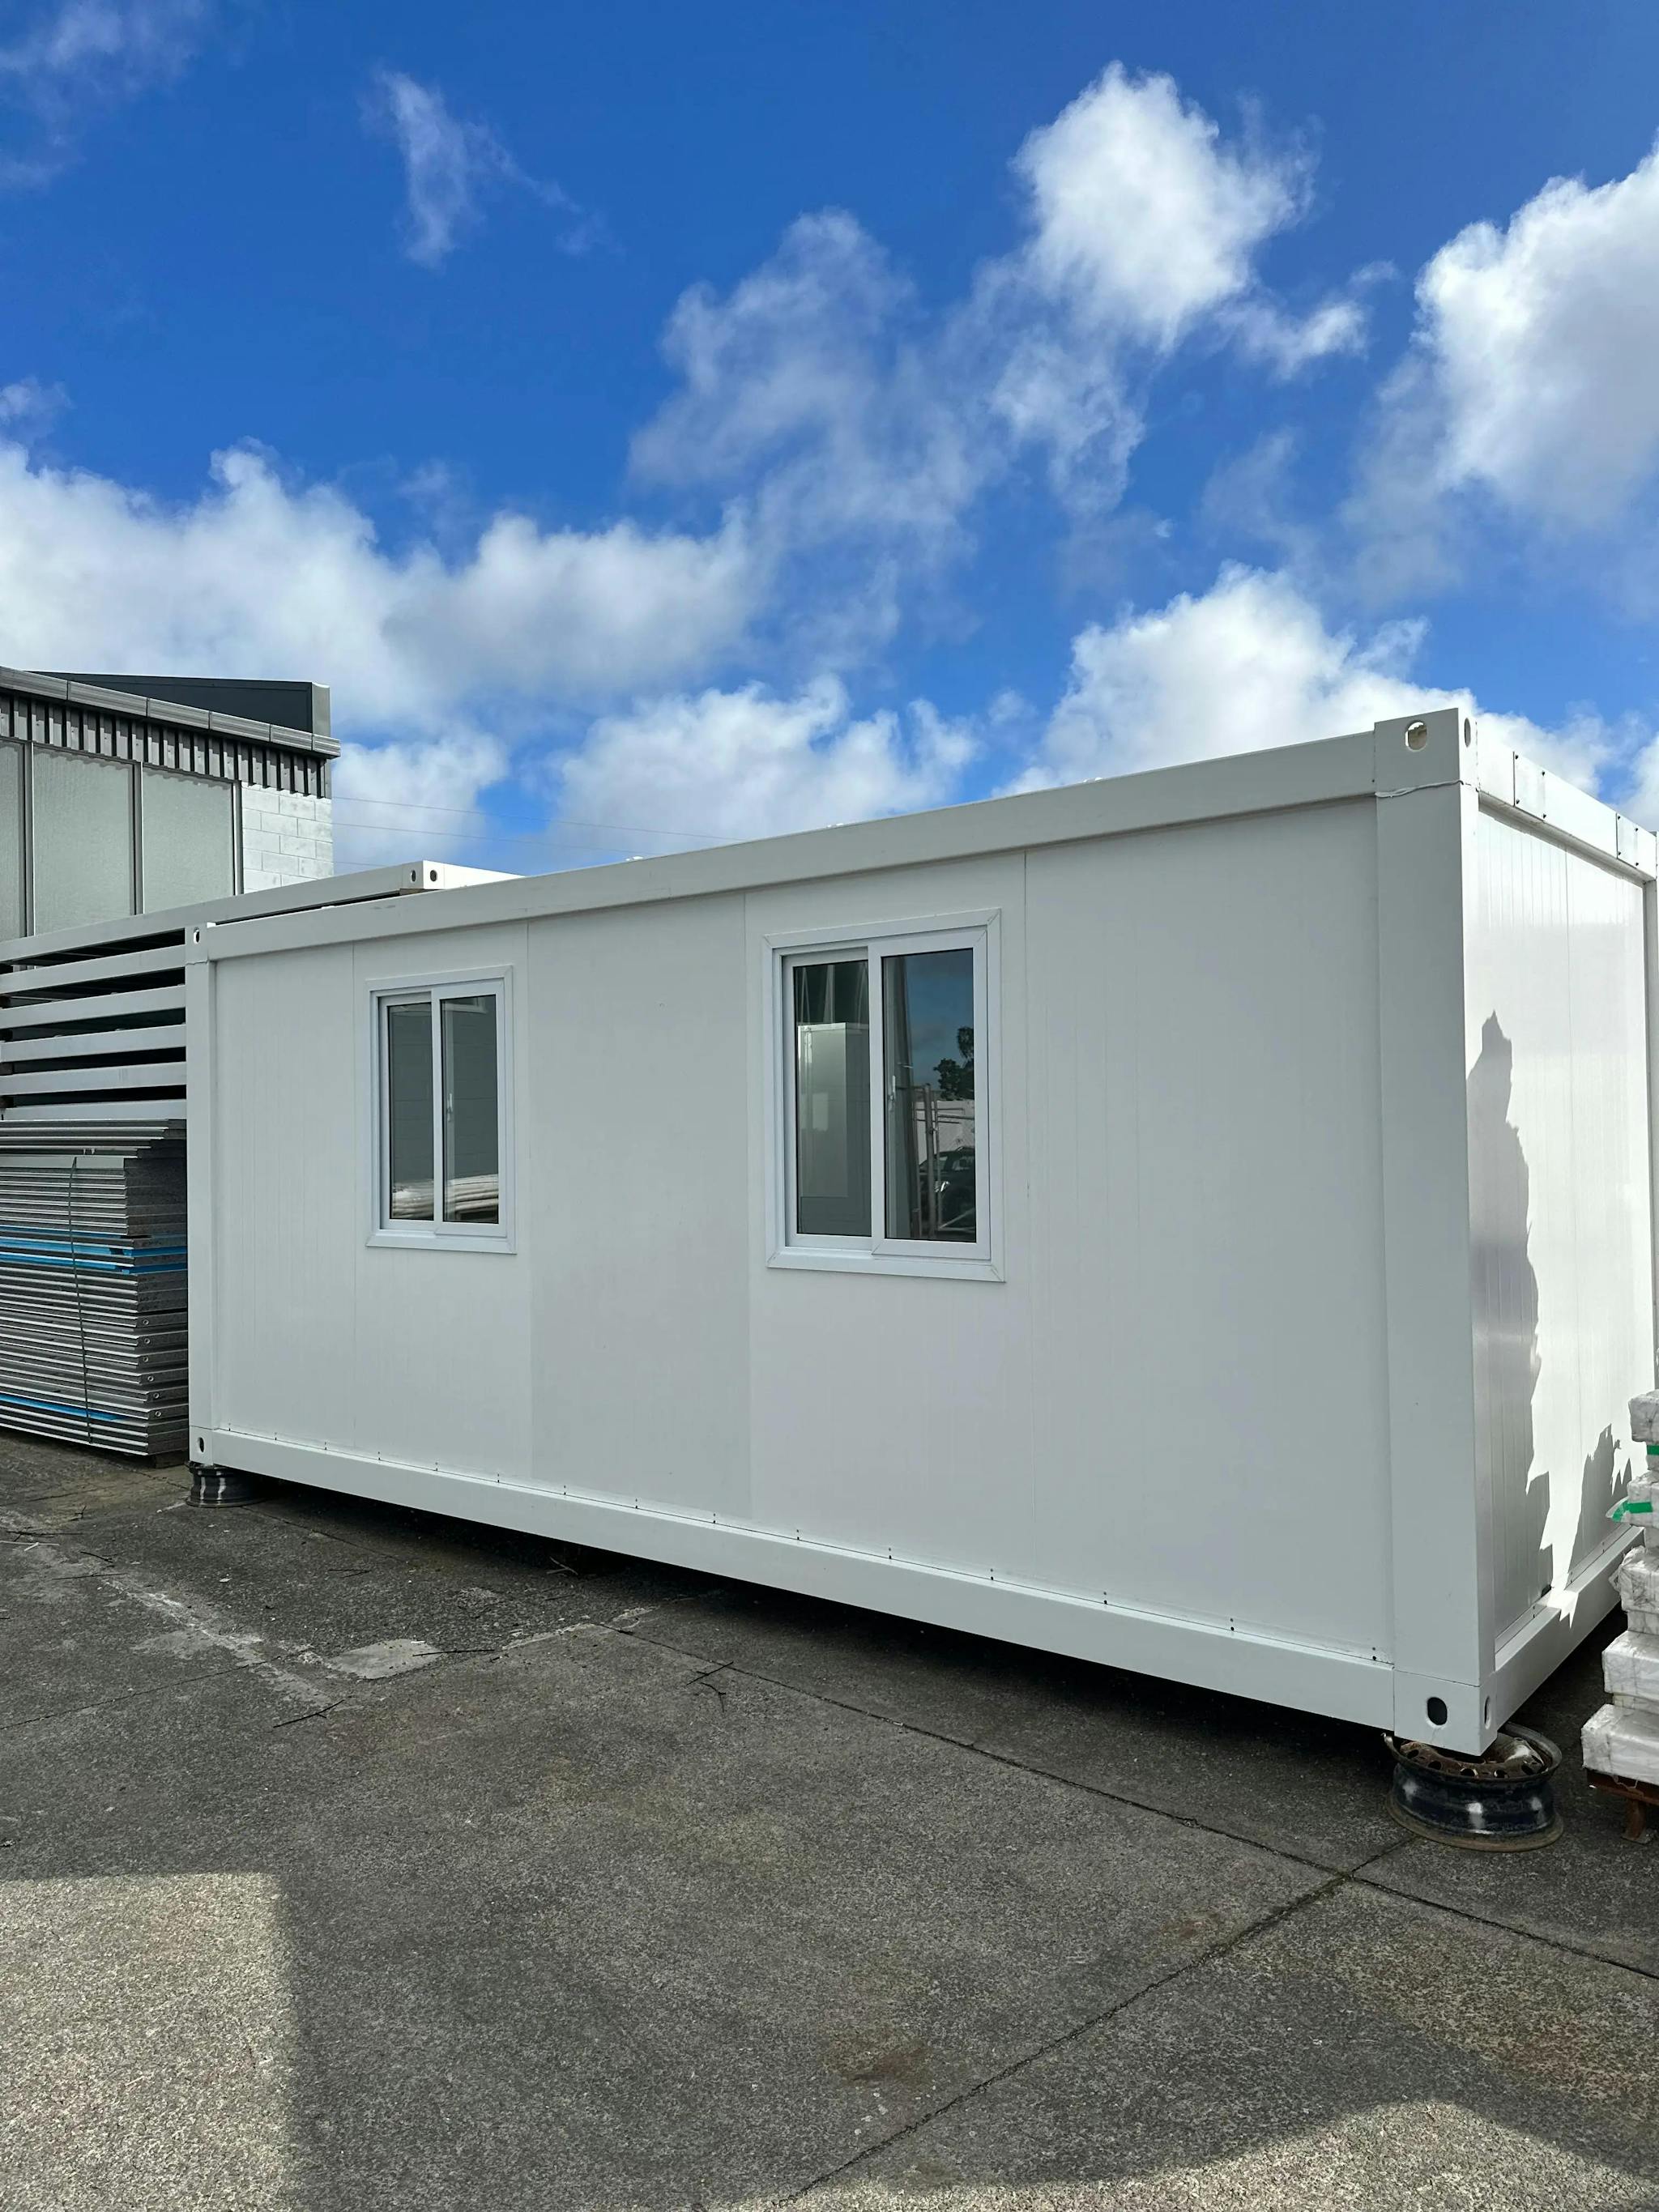 Baseline cabin ready to go in Auckland